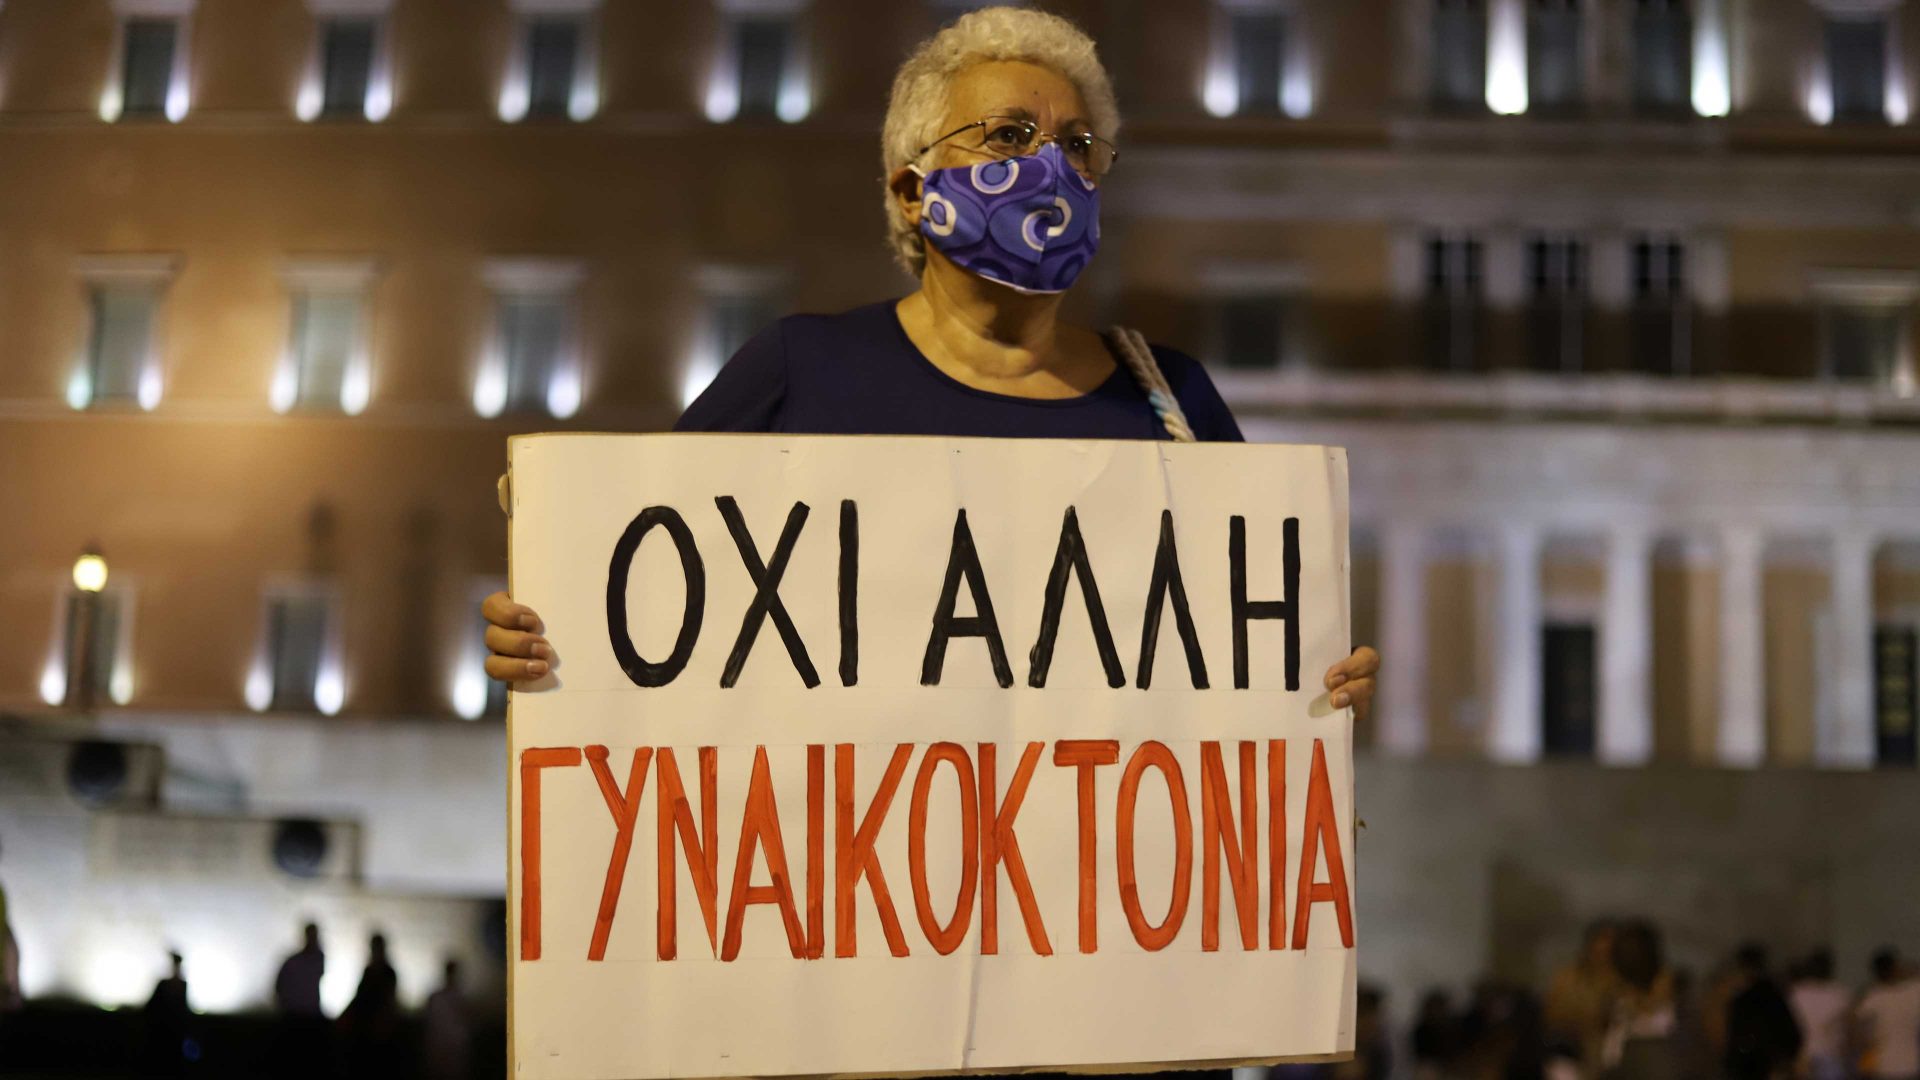 Women rights activist holding placard protest against feminicide. Photo: George Panagakis/Pacific Press/LightRocket via Getty Images